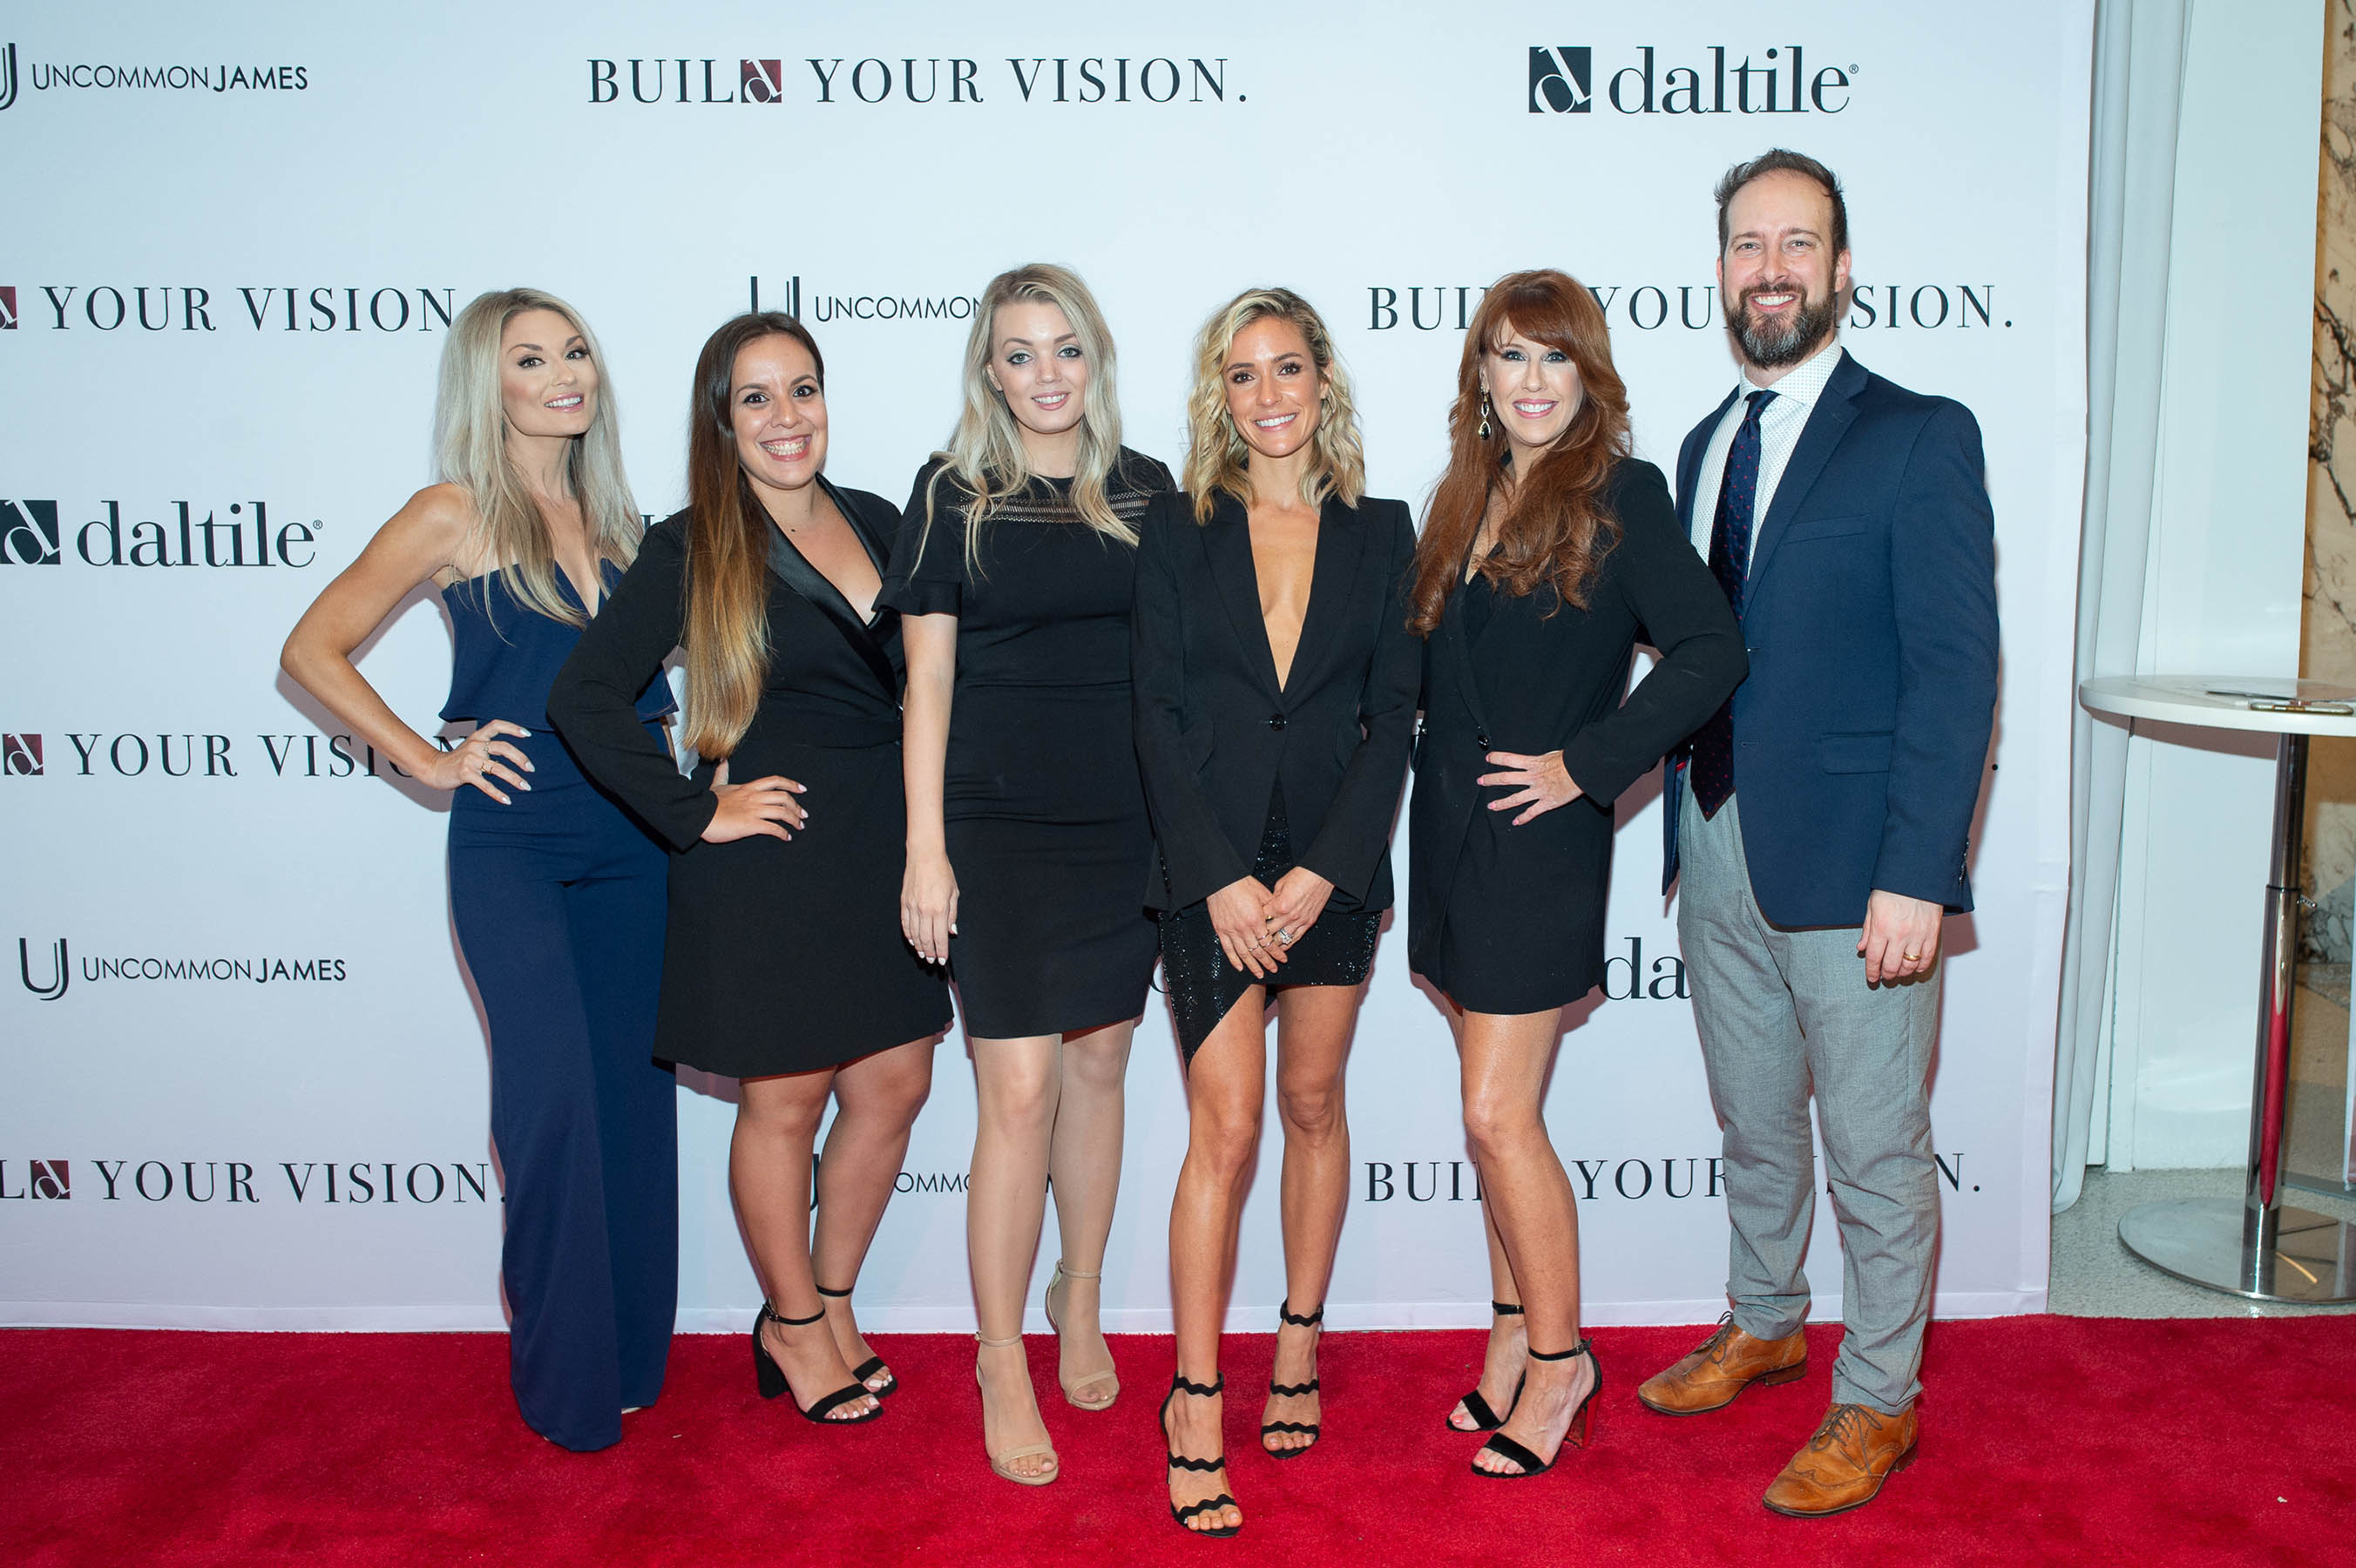 Daltile personnel at New York Fashion Week